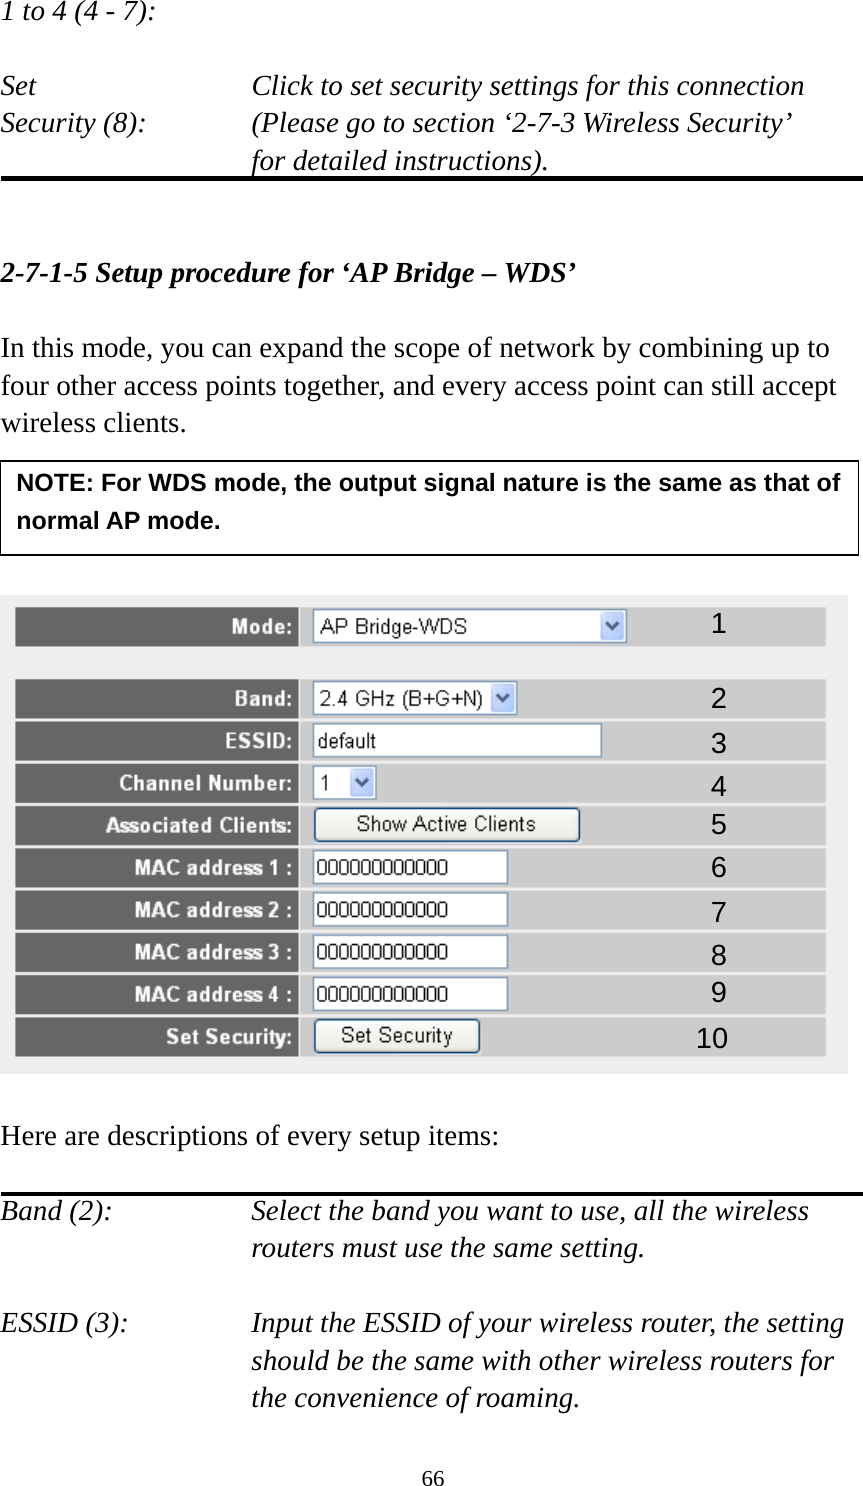 66 1 to 4 (4 - 7):    Set    Click to set security settings for this connection Security (8):  (Please go to section ‘2-7-3 Wireless Security’   for detailed instructions).   2-7-1-5 Setup procedure for ‘AP Bridge – WDS’  In this mode, you can expand the scope of network by combining up to four other access points together, and every access point can still accept wireless clients.       Here are descriptions of every setup items:  Band (2):  Select the band you want to use, all the wireless routers must use the same setting.  ESSID (3):  Input the ESSID of your wireless router, the setting should be the same with other wireless routers for the convenience of roaming. 1 2 3 4 5 7 8 6 9 10 NOTE: For WDS mode, the output signal nature is the same as that of normal AP mode. 